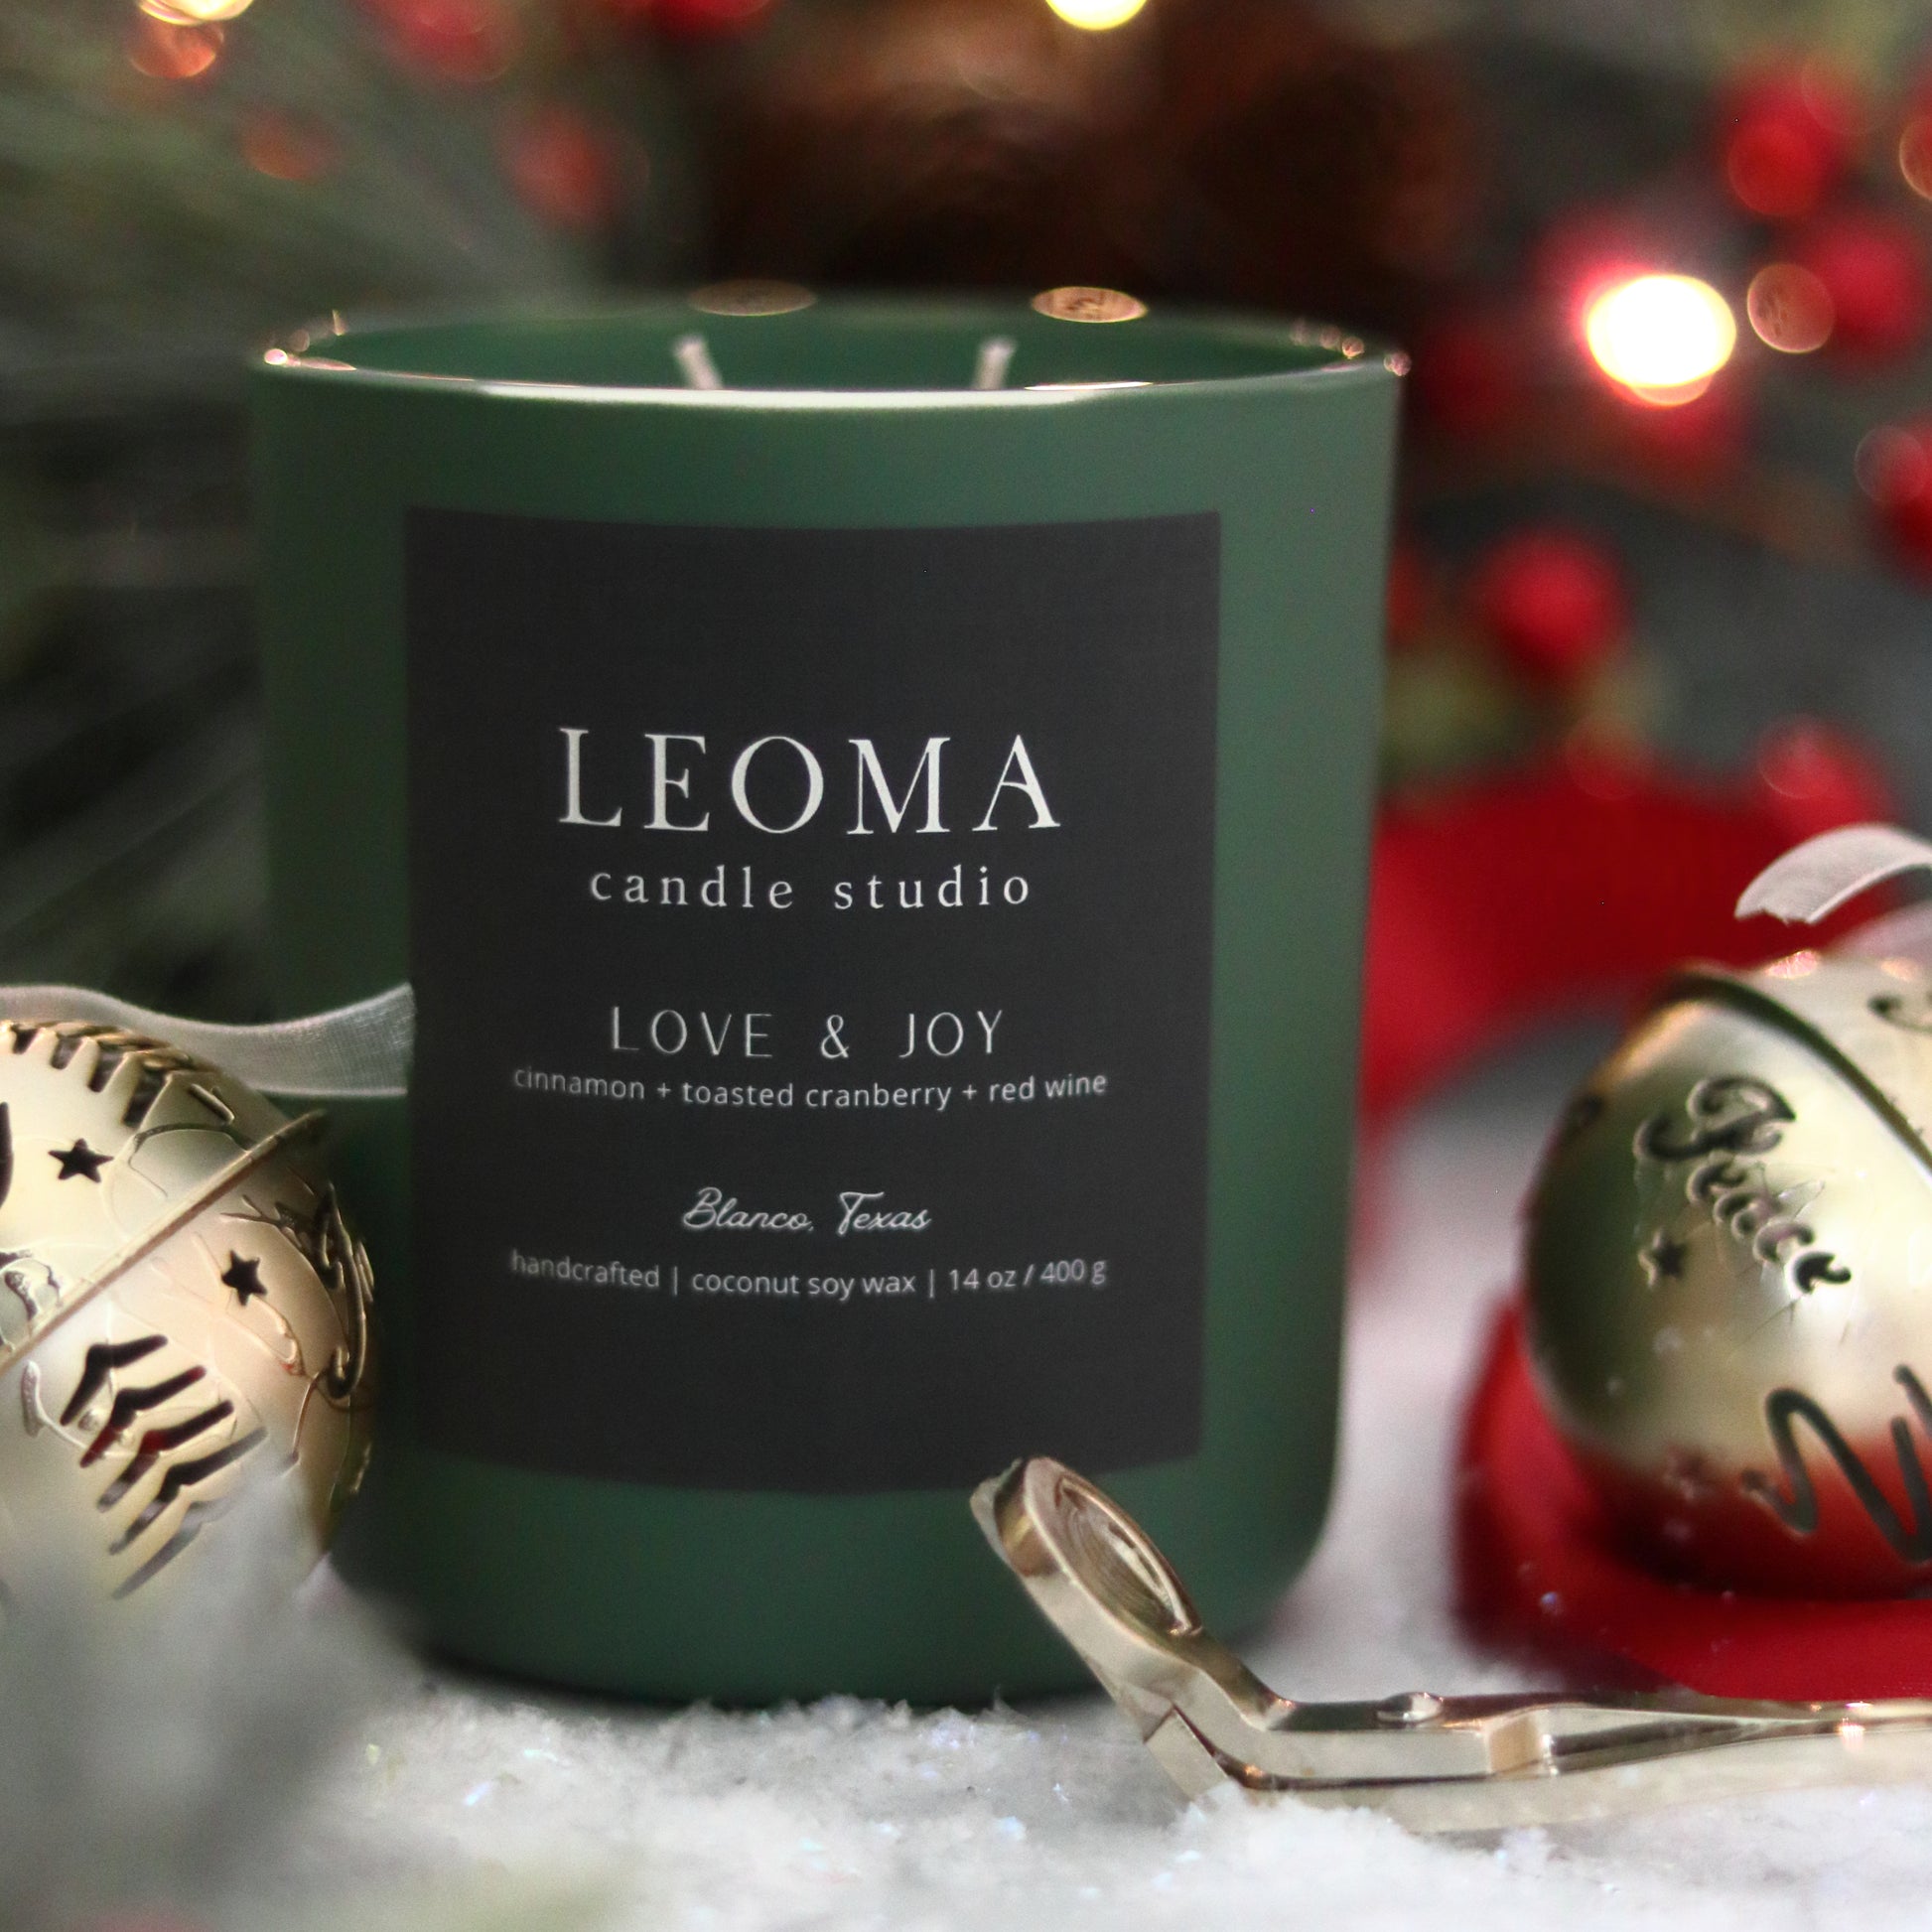 Handcrafted eco-friendly scented candle. Natural coconut & soy wax, toxin-free, 100% cotton wicks. Olive vessel. Love and Joy winter scent.